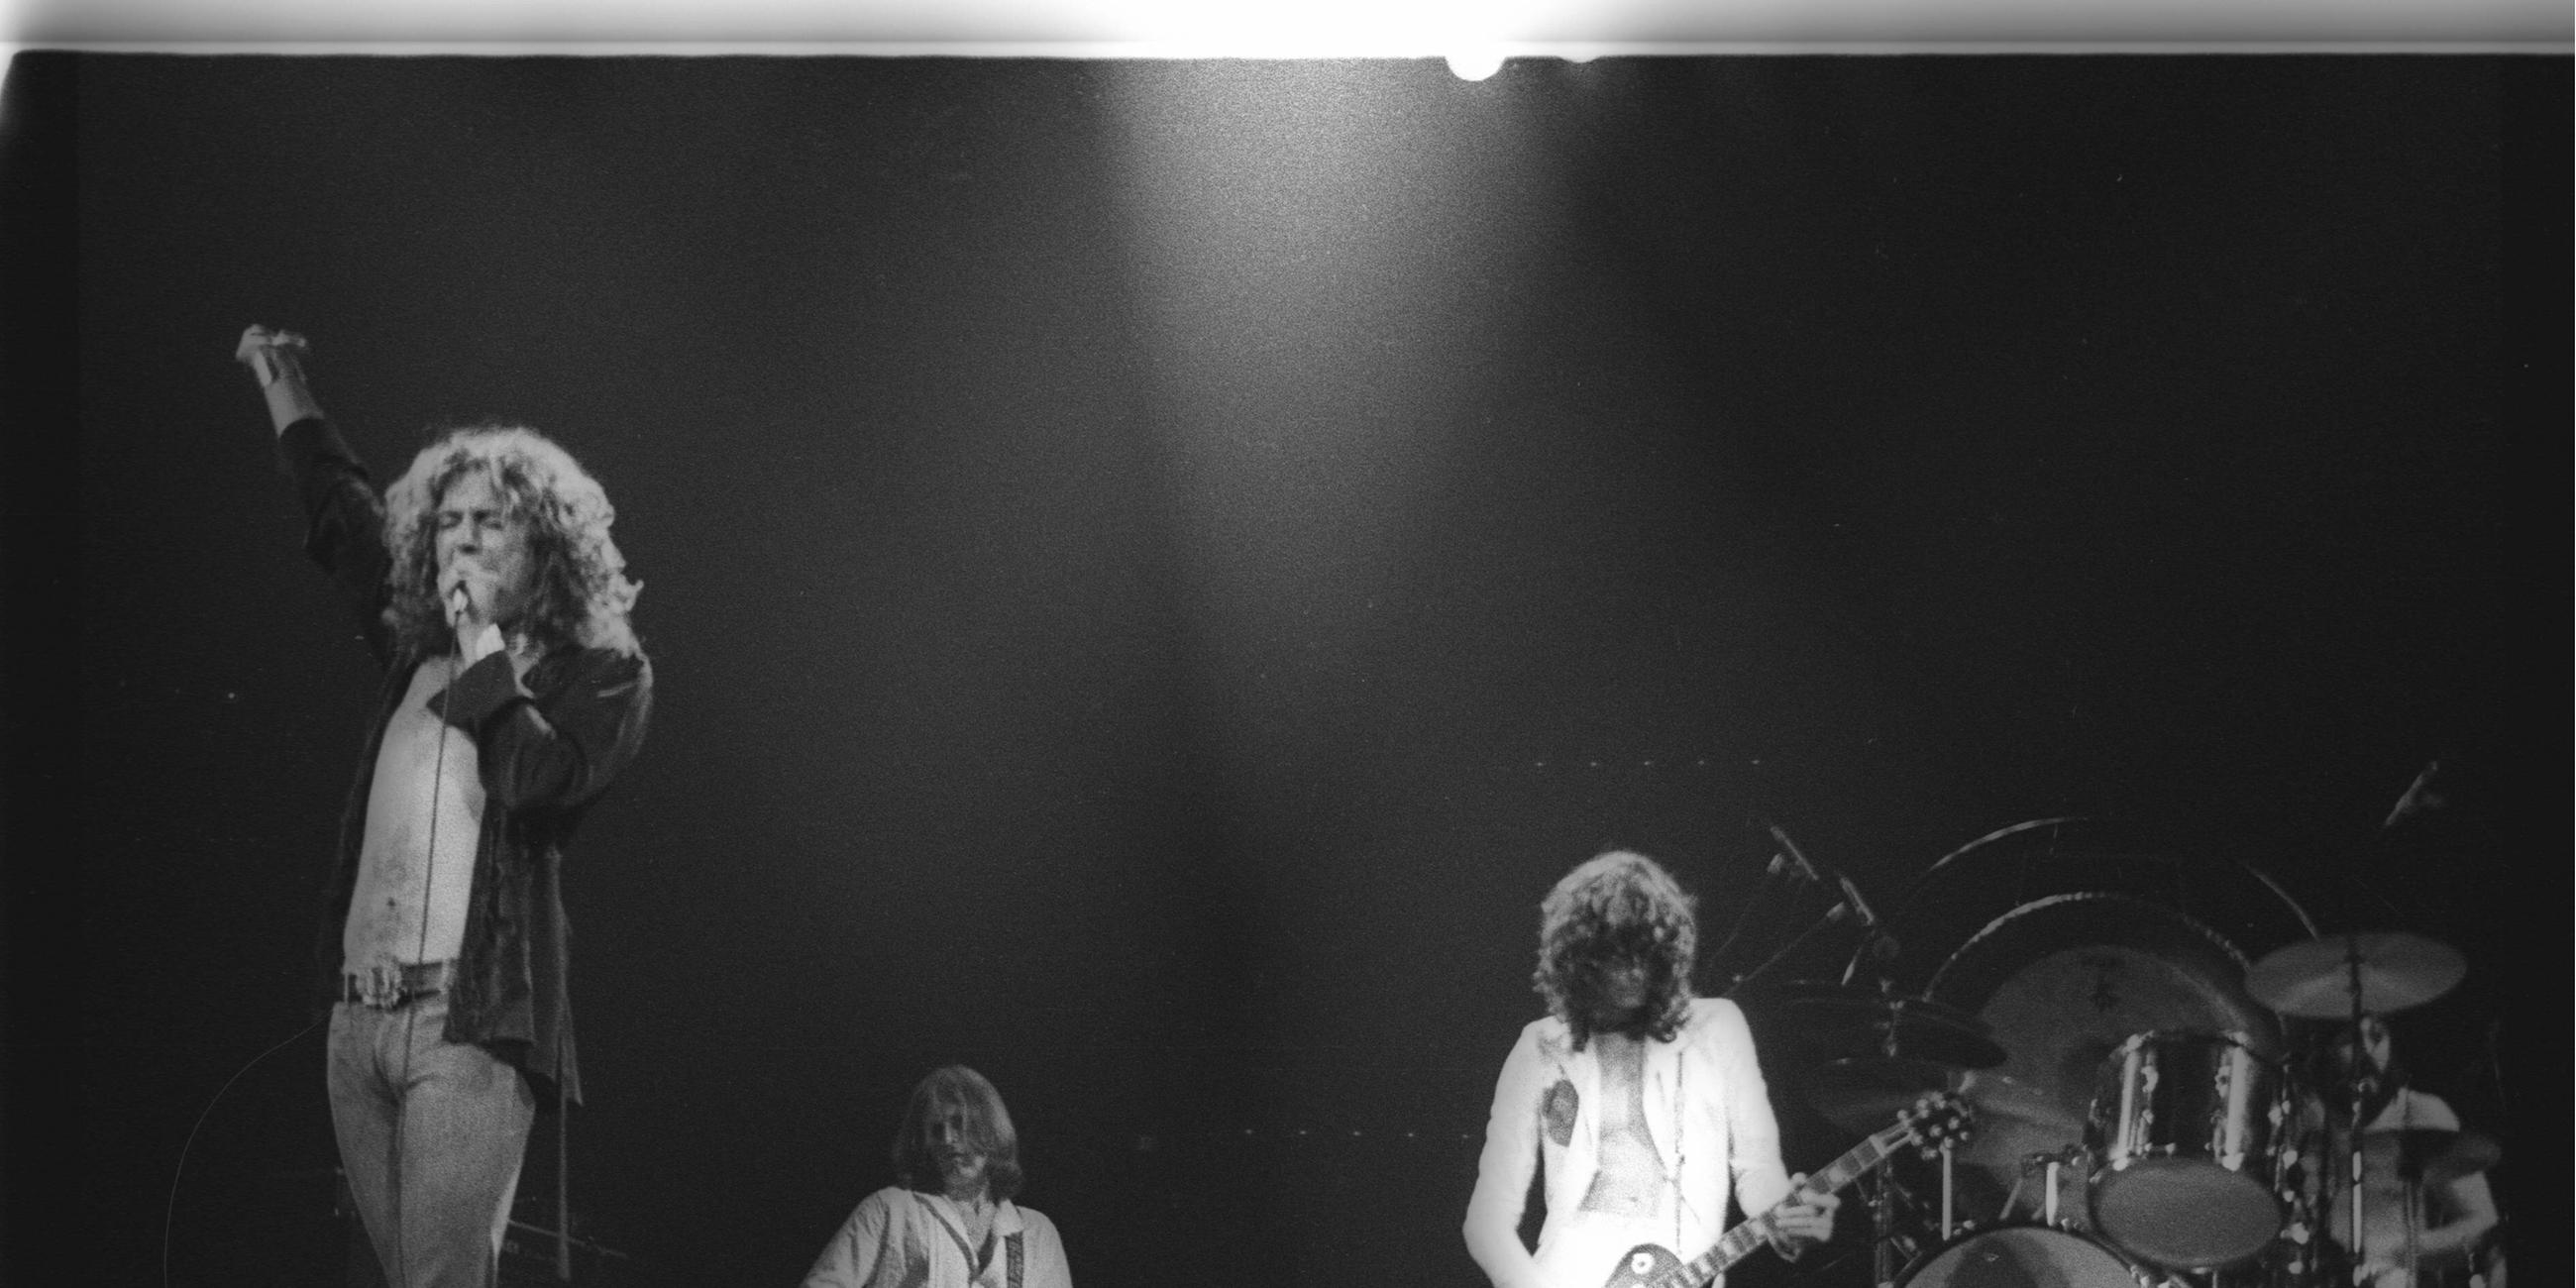 LED ZEPPELIN performing live at The Fabulous Forum in Inglewood CA USA on June 26 1977 Photo © Ke